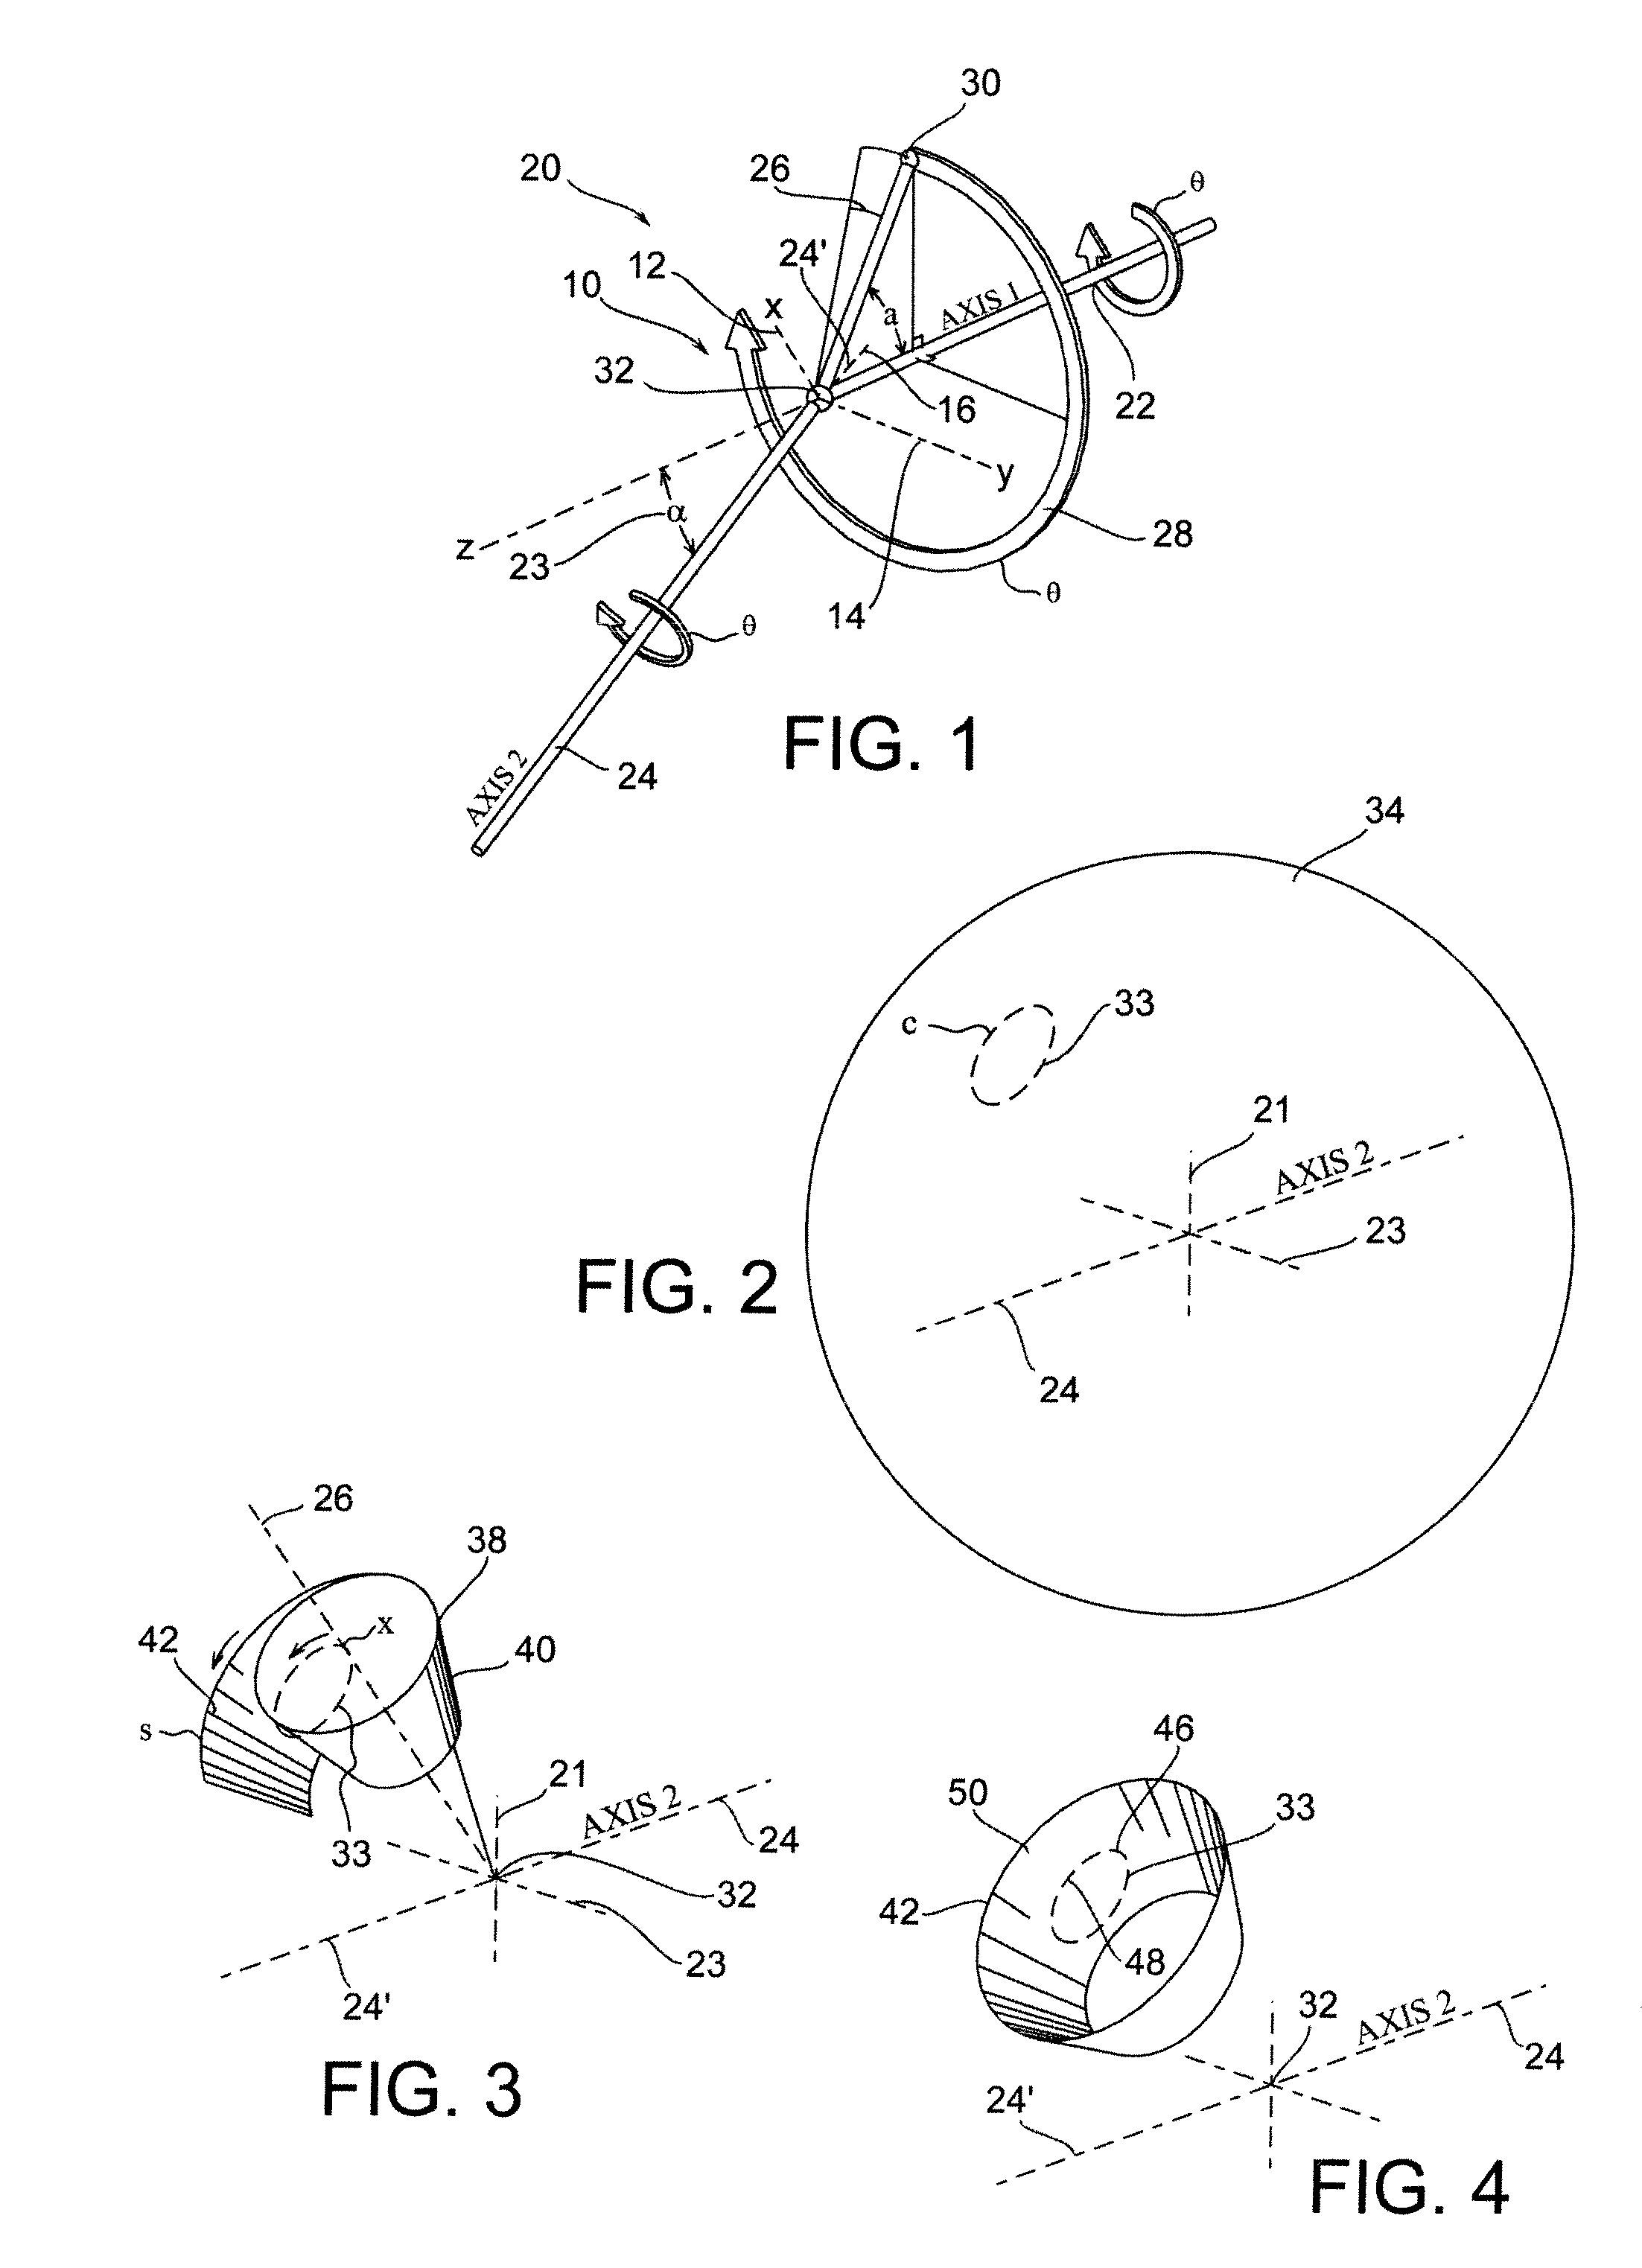 Indexed positive displacement rotary motion device